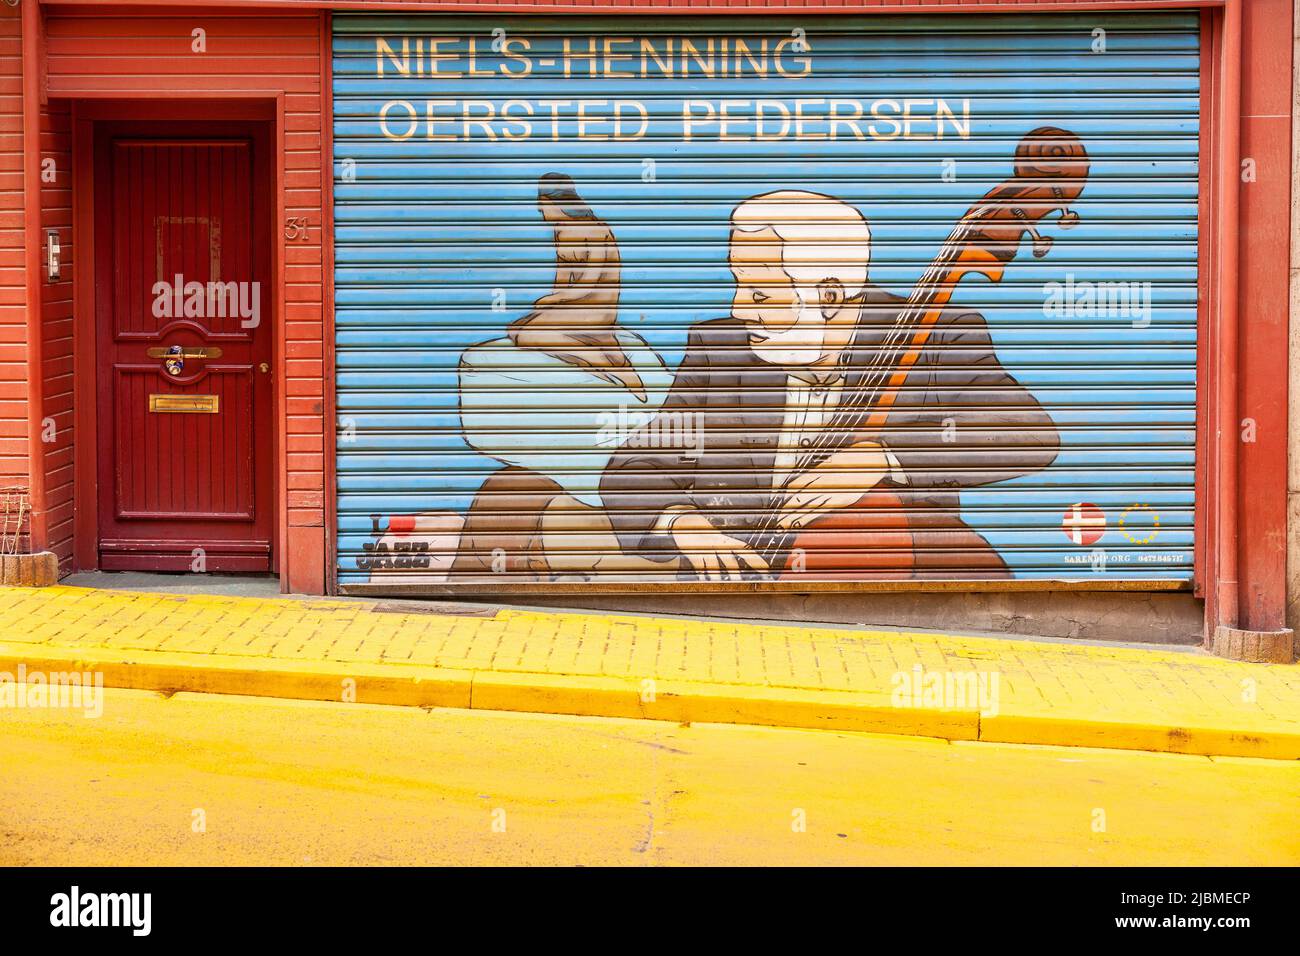 Pictorial representation, on a shutter, of double bass player Niels-Henning Pedersen with, in the background, the siren of Copenhagen, Stock Photo